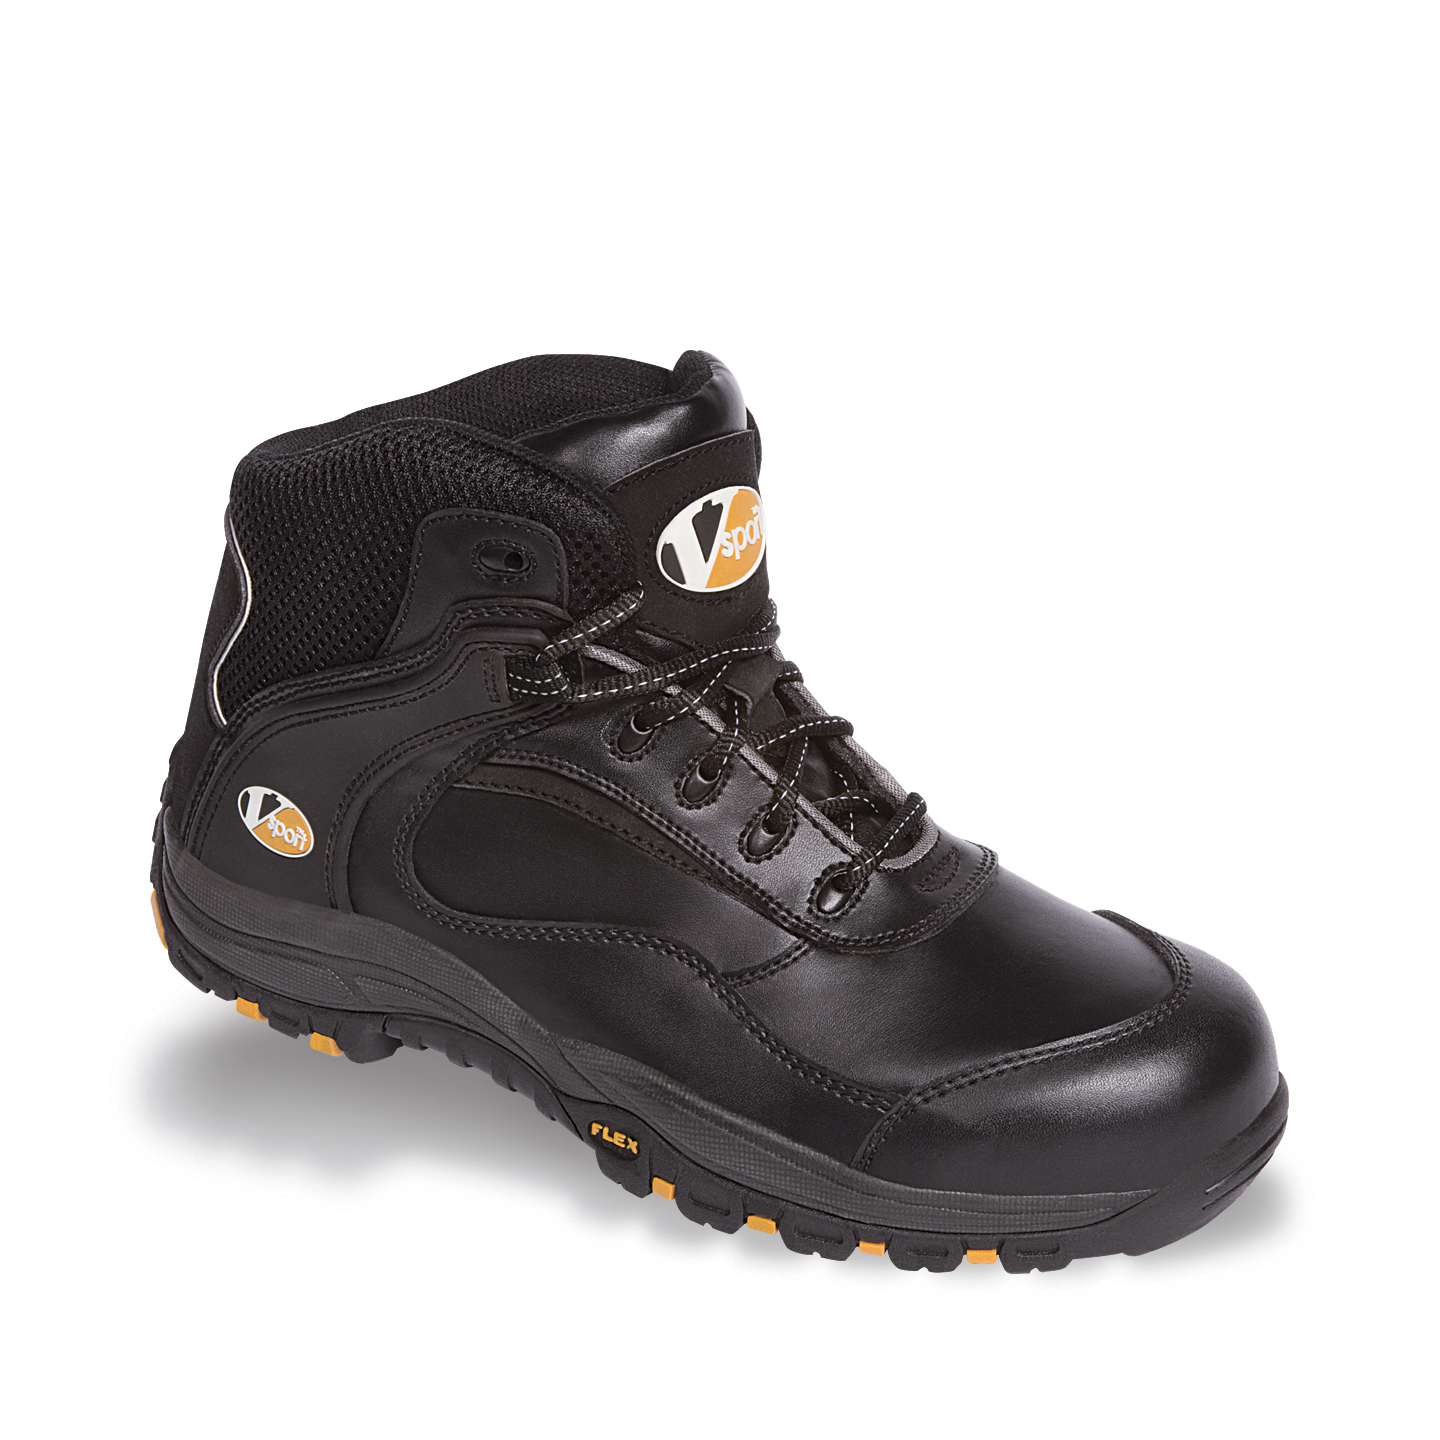 VS640 Smash S1P Composite  Safety Trainer Boot by V12 Footwear with FREE DELIVERY